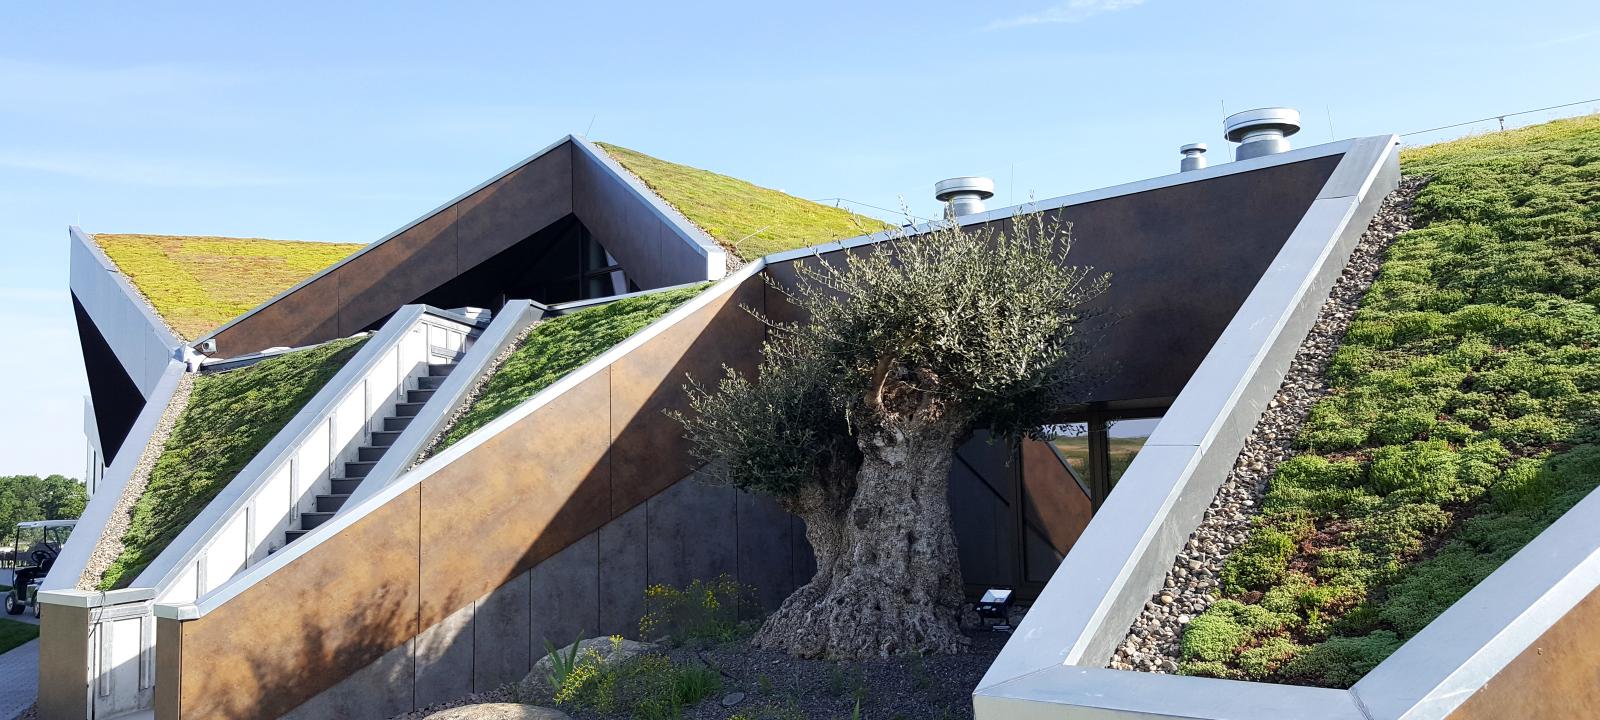 Olive tree in front of a building with a pitched green roof